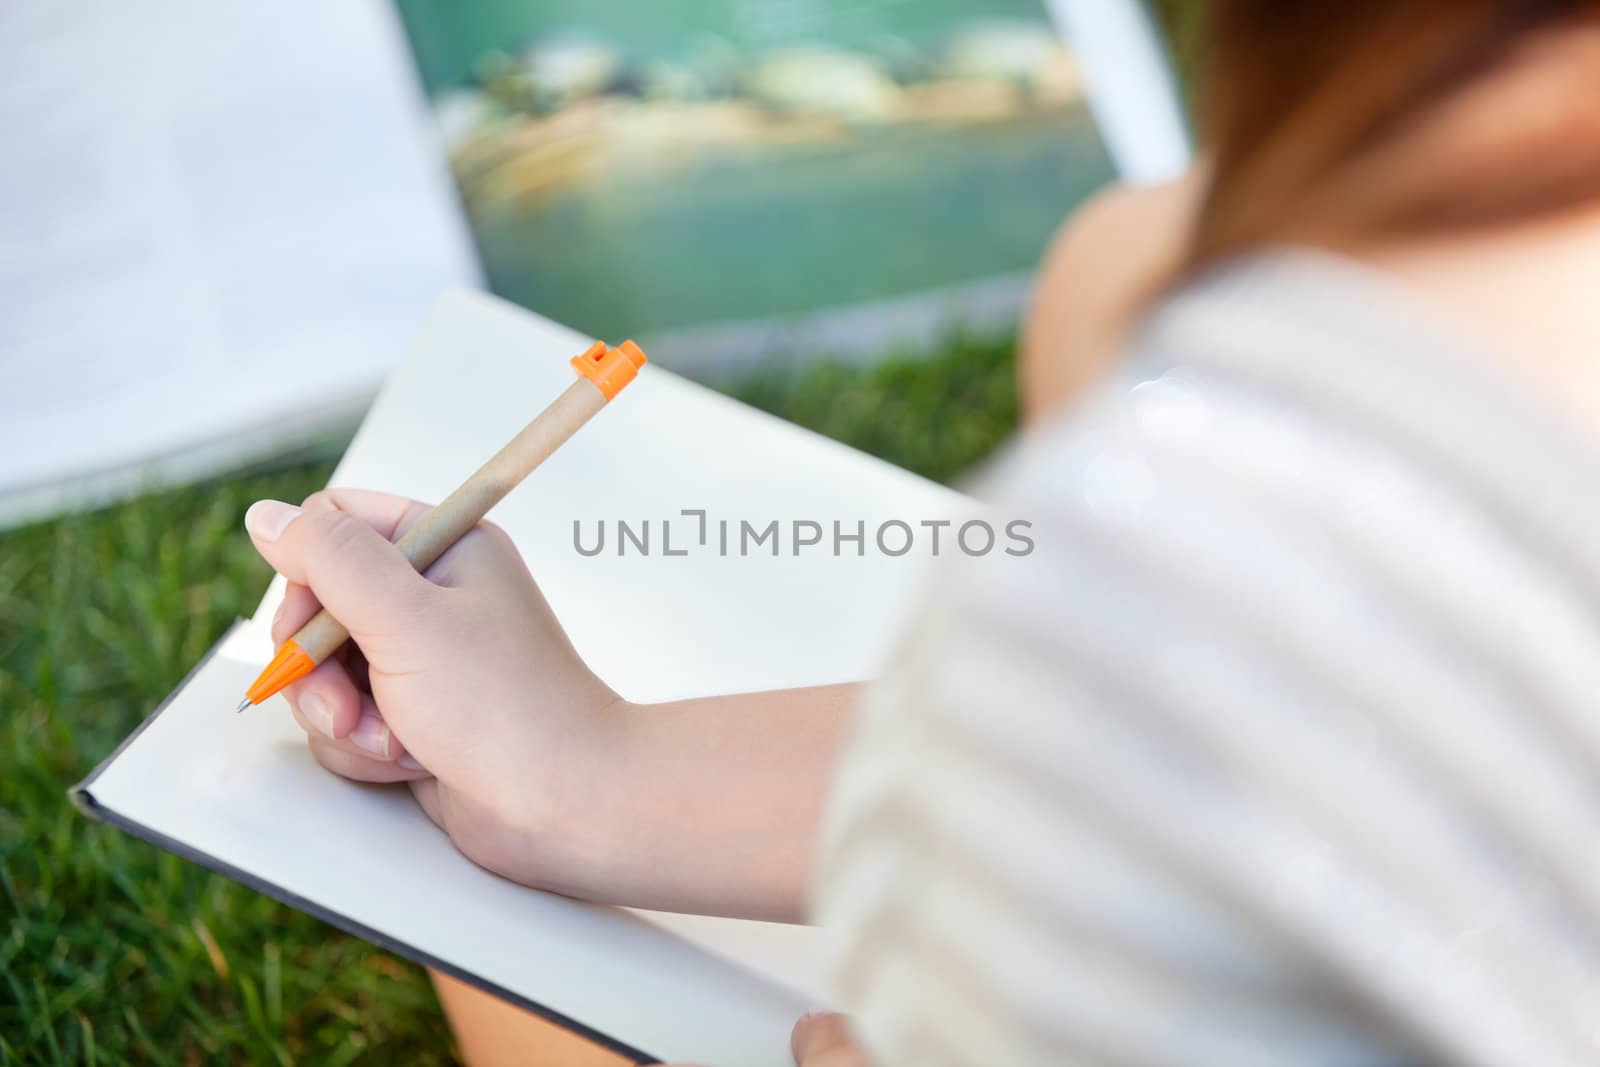 Close-up of a girl writing in a notebook